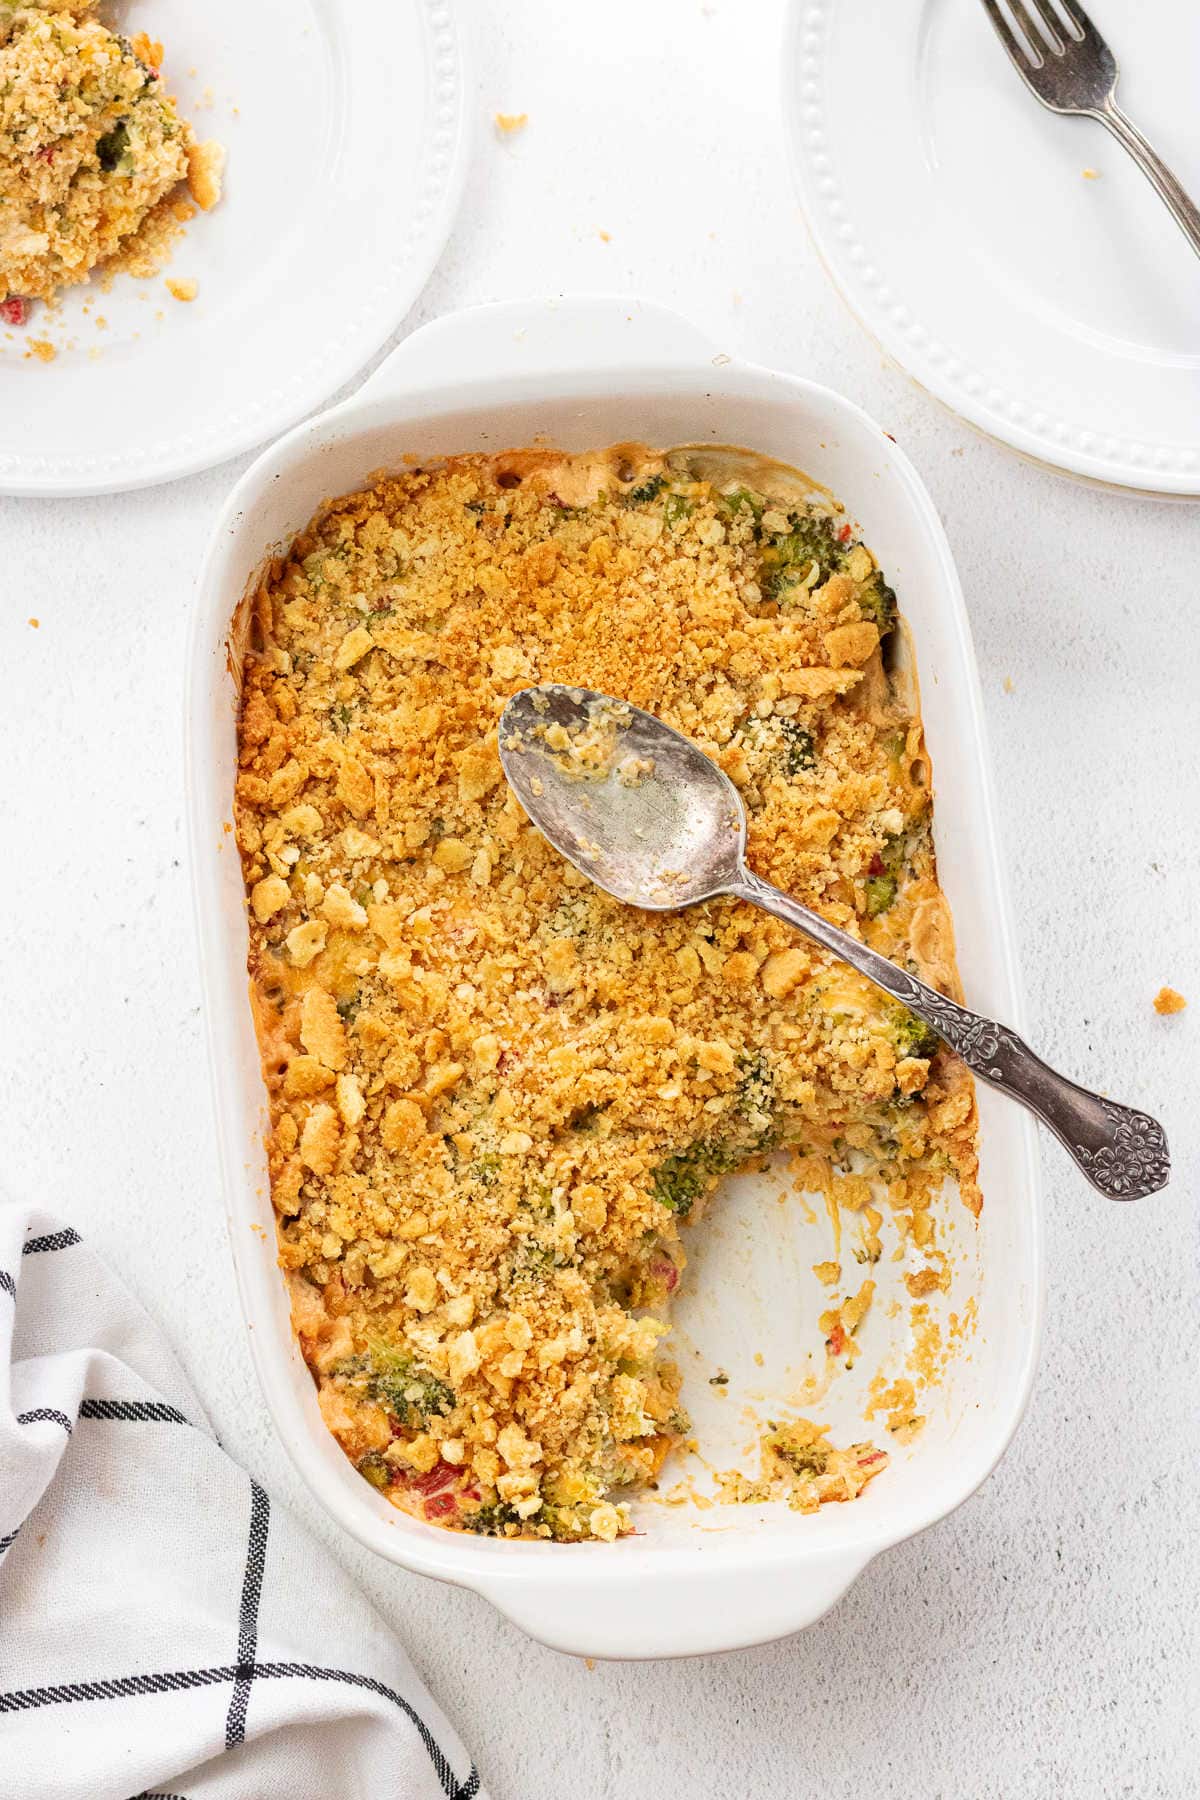 Overhead view of a broccoli casserole with a serving removed.